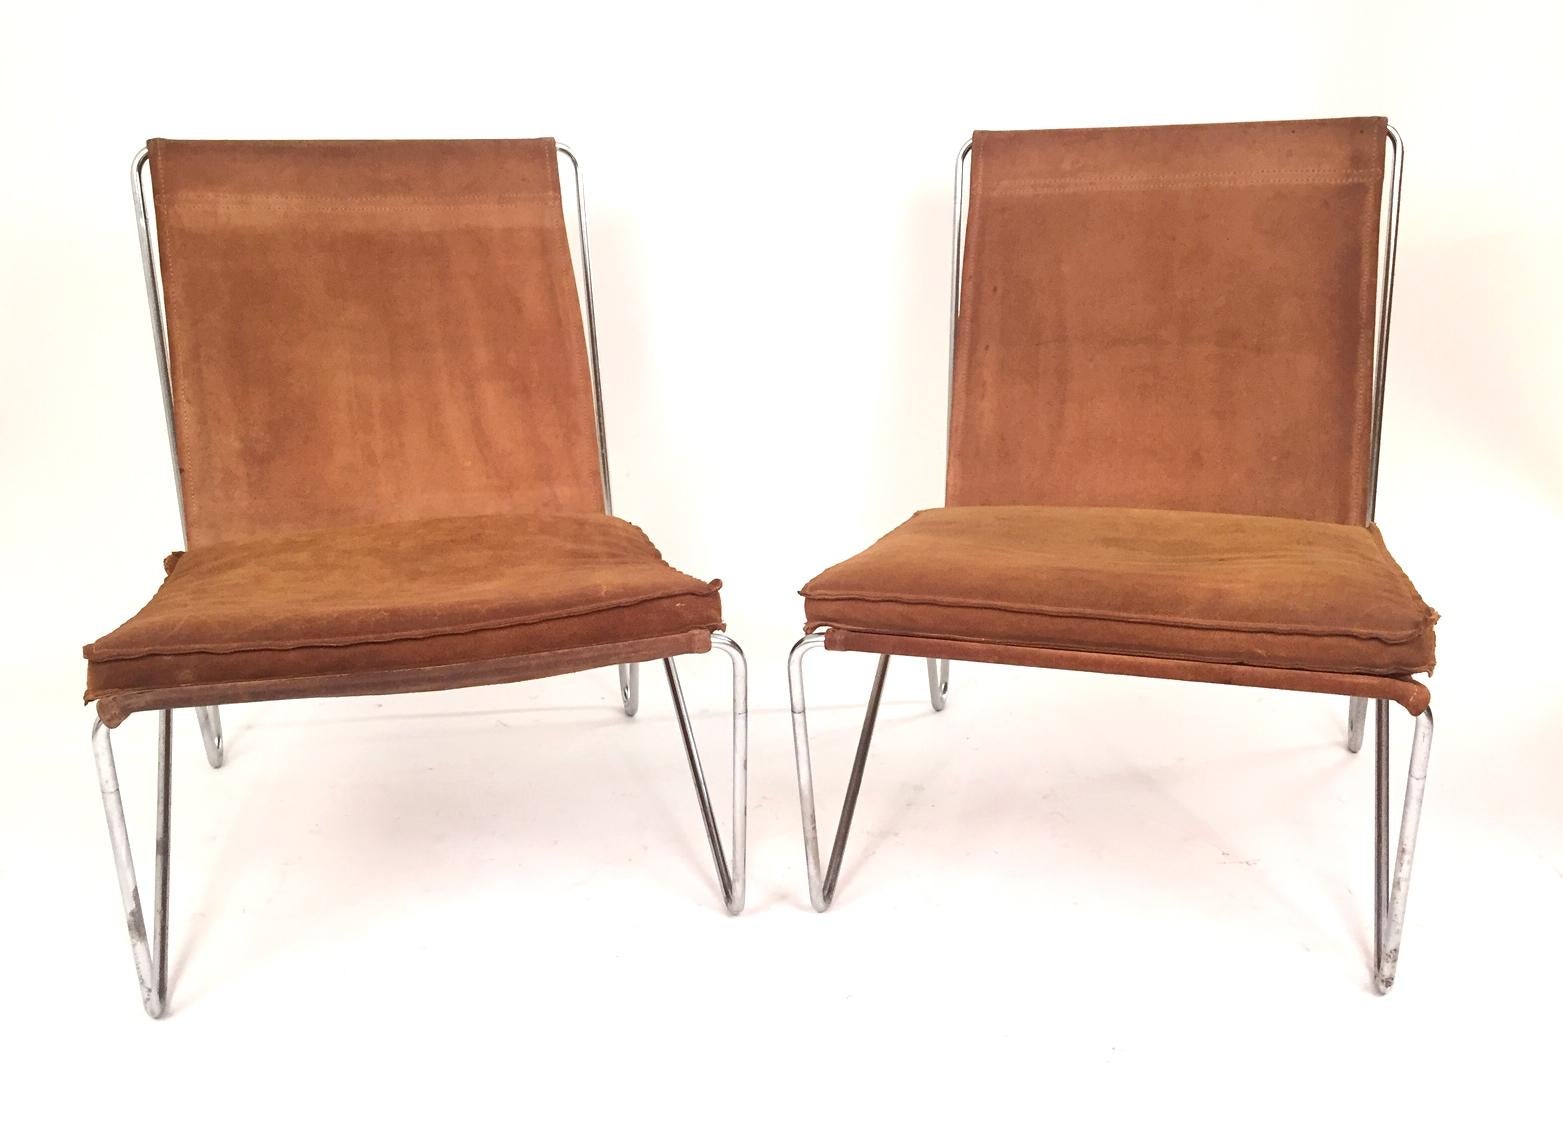 Danish Verner Panton Pair of Suede Leather Bachelor Chairs, 1957